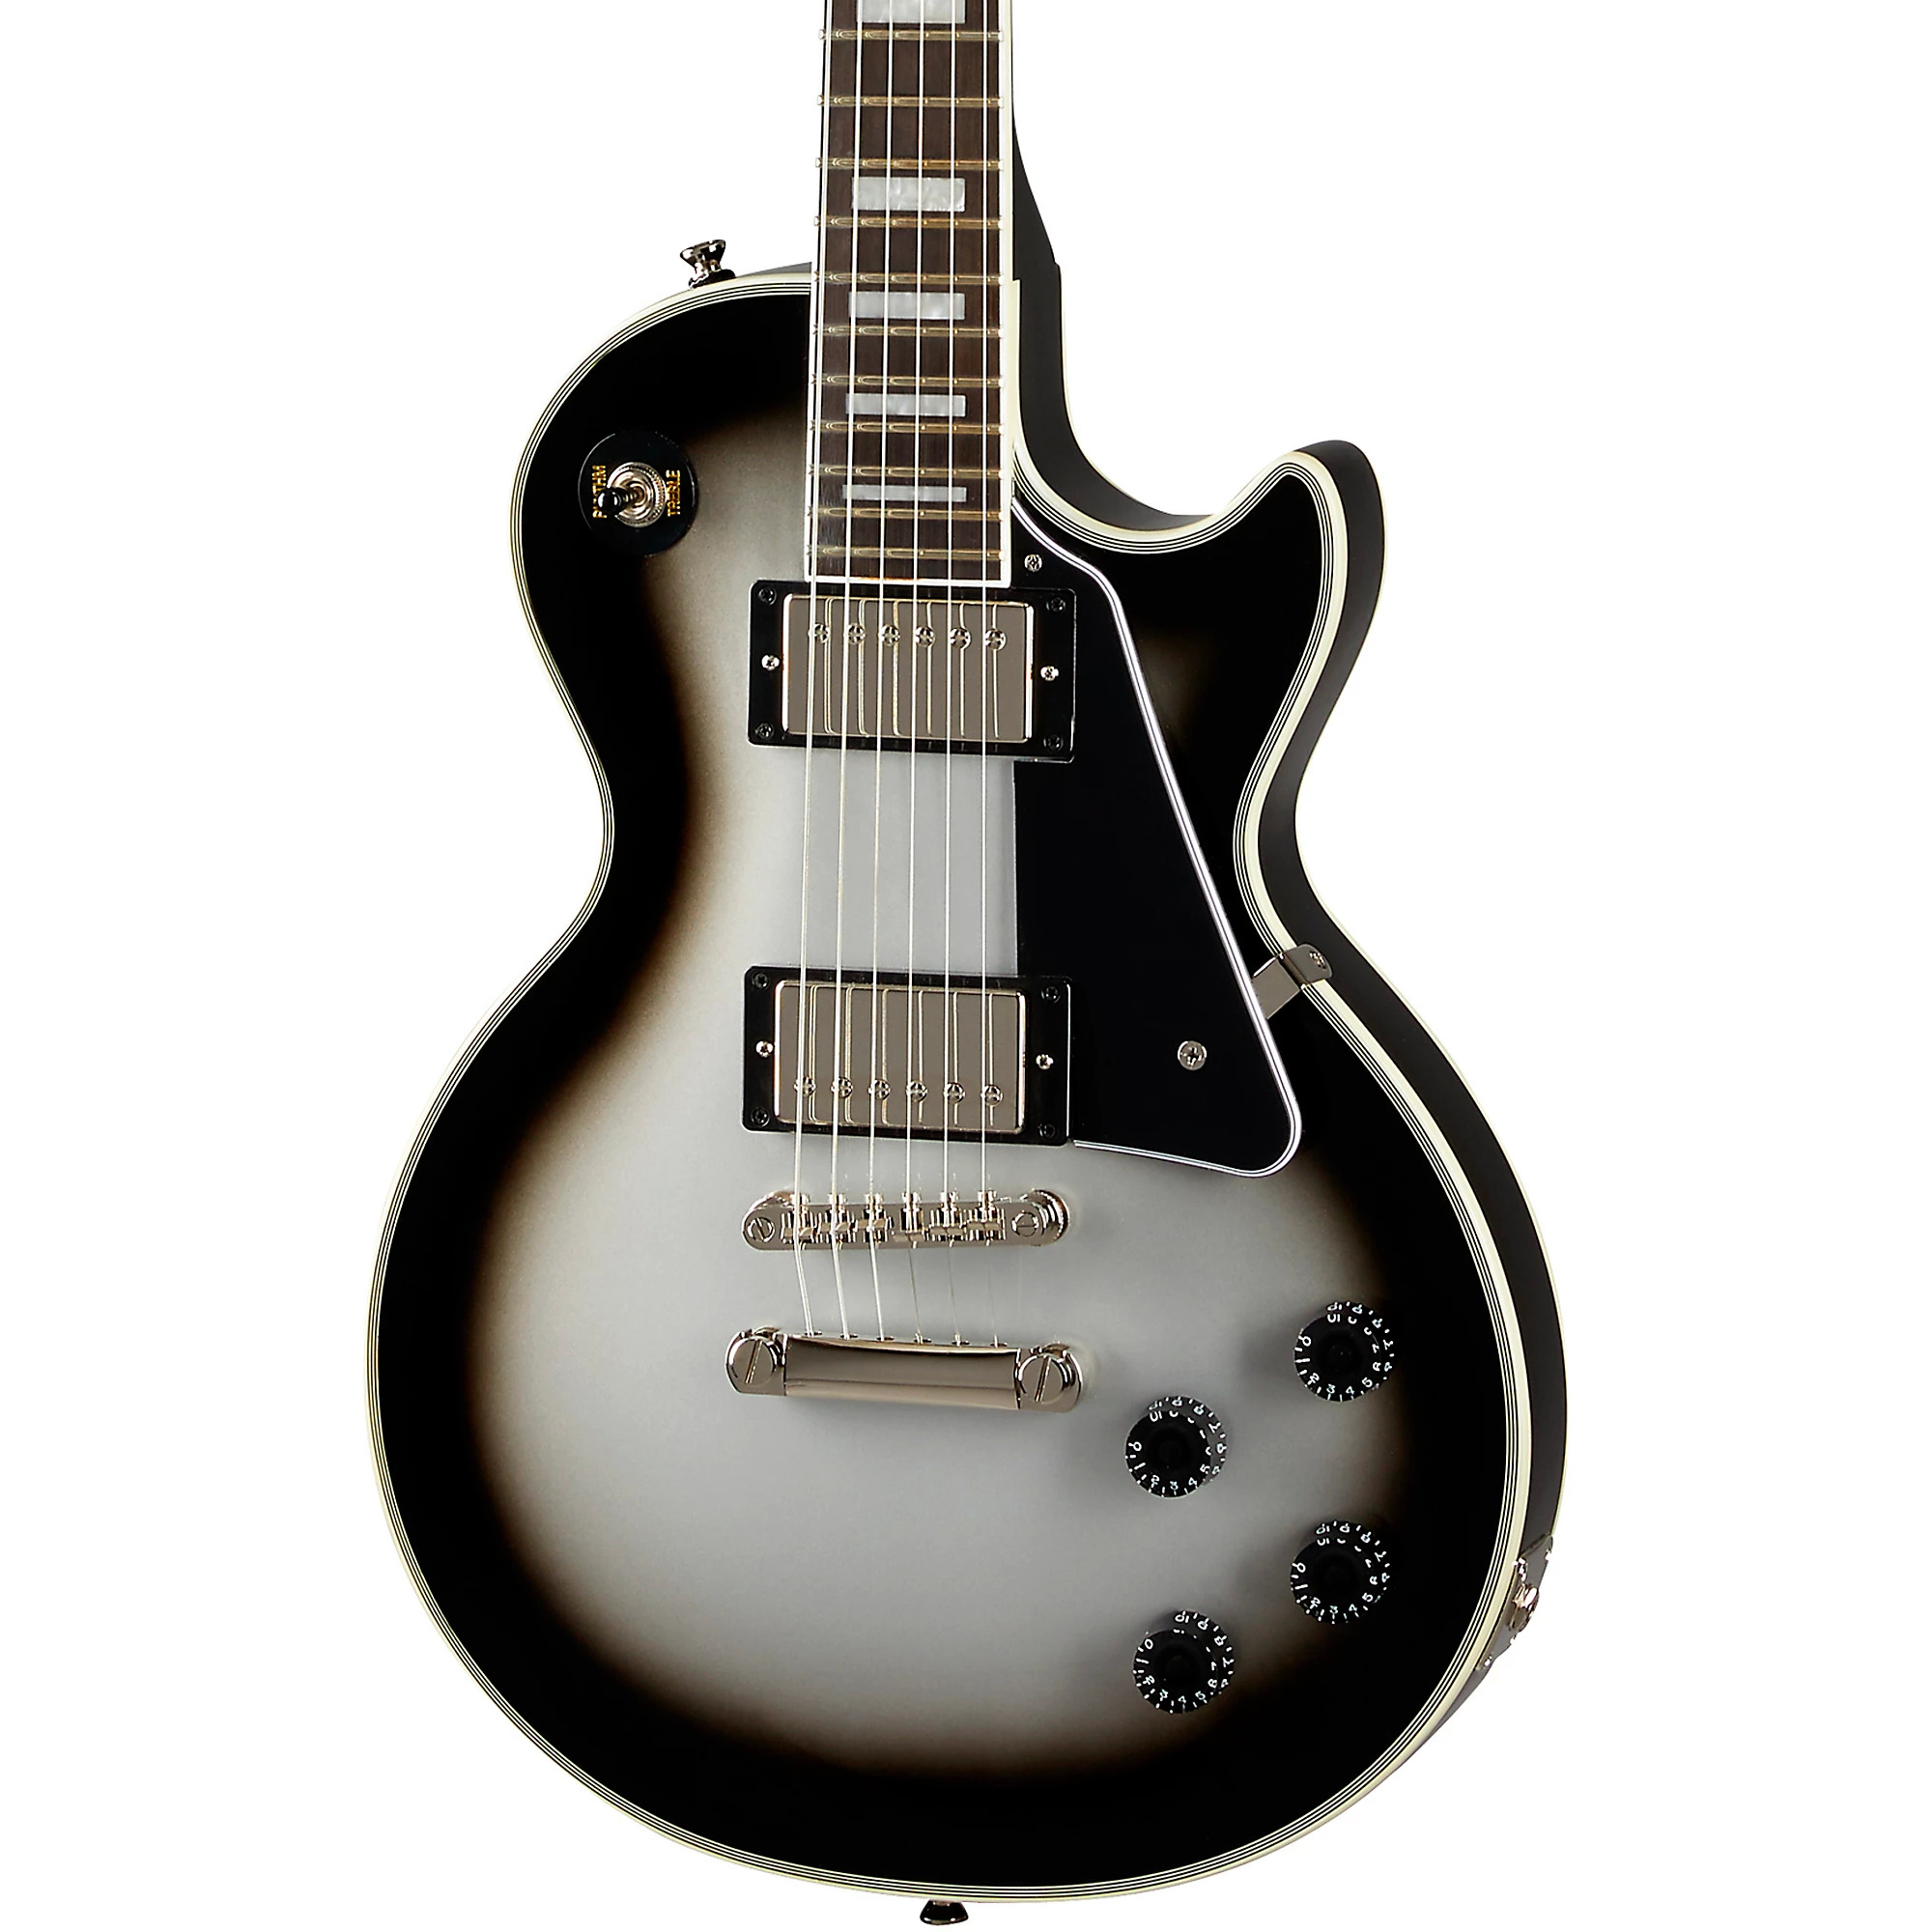 Epiphone Les Paul Custom Limited Edition Electric Guitar (SilverBurst) $599 + Free Shipping